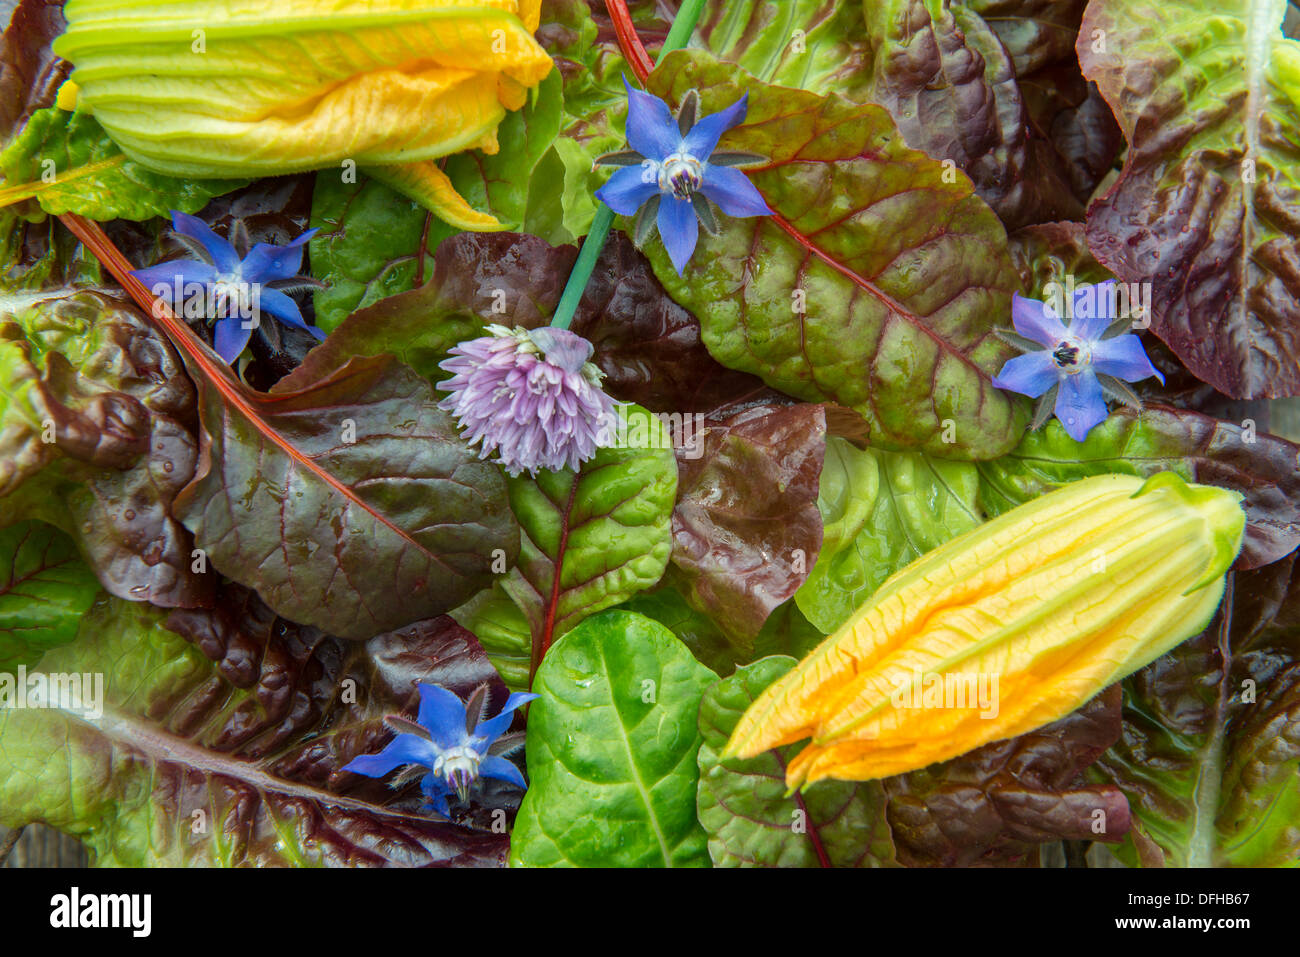 Summer colection of edible leaves. Stock Photo